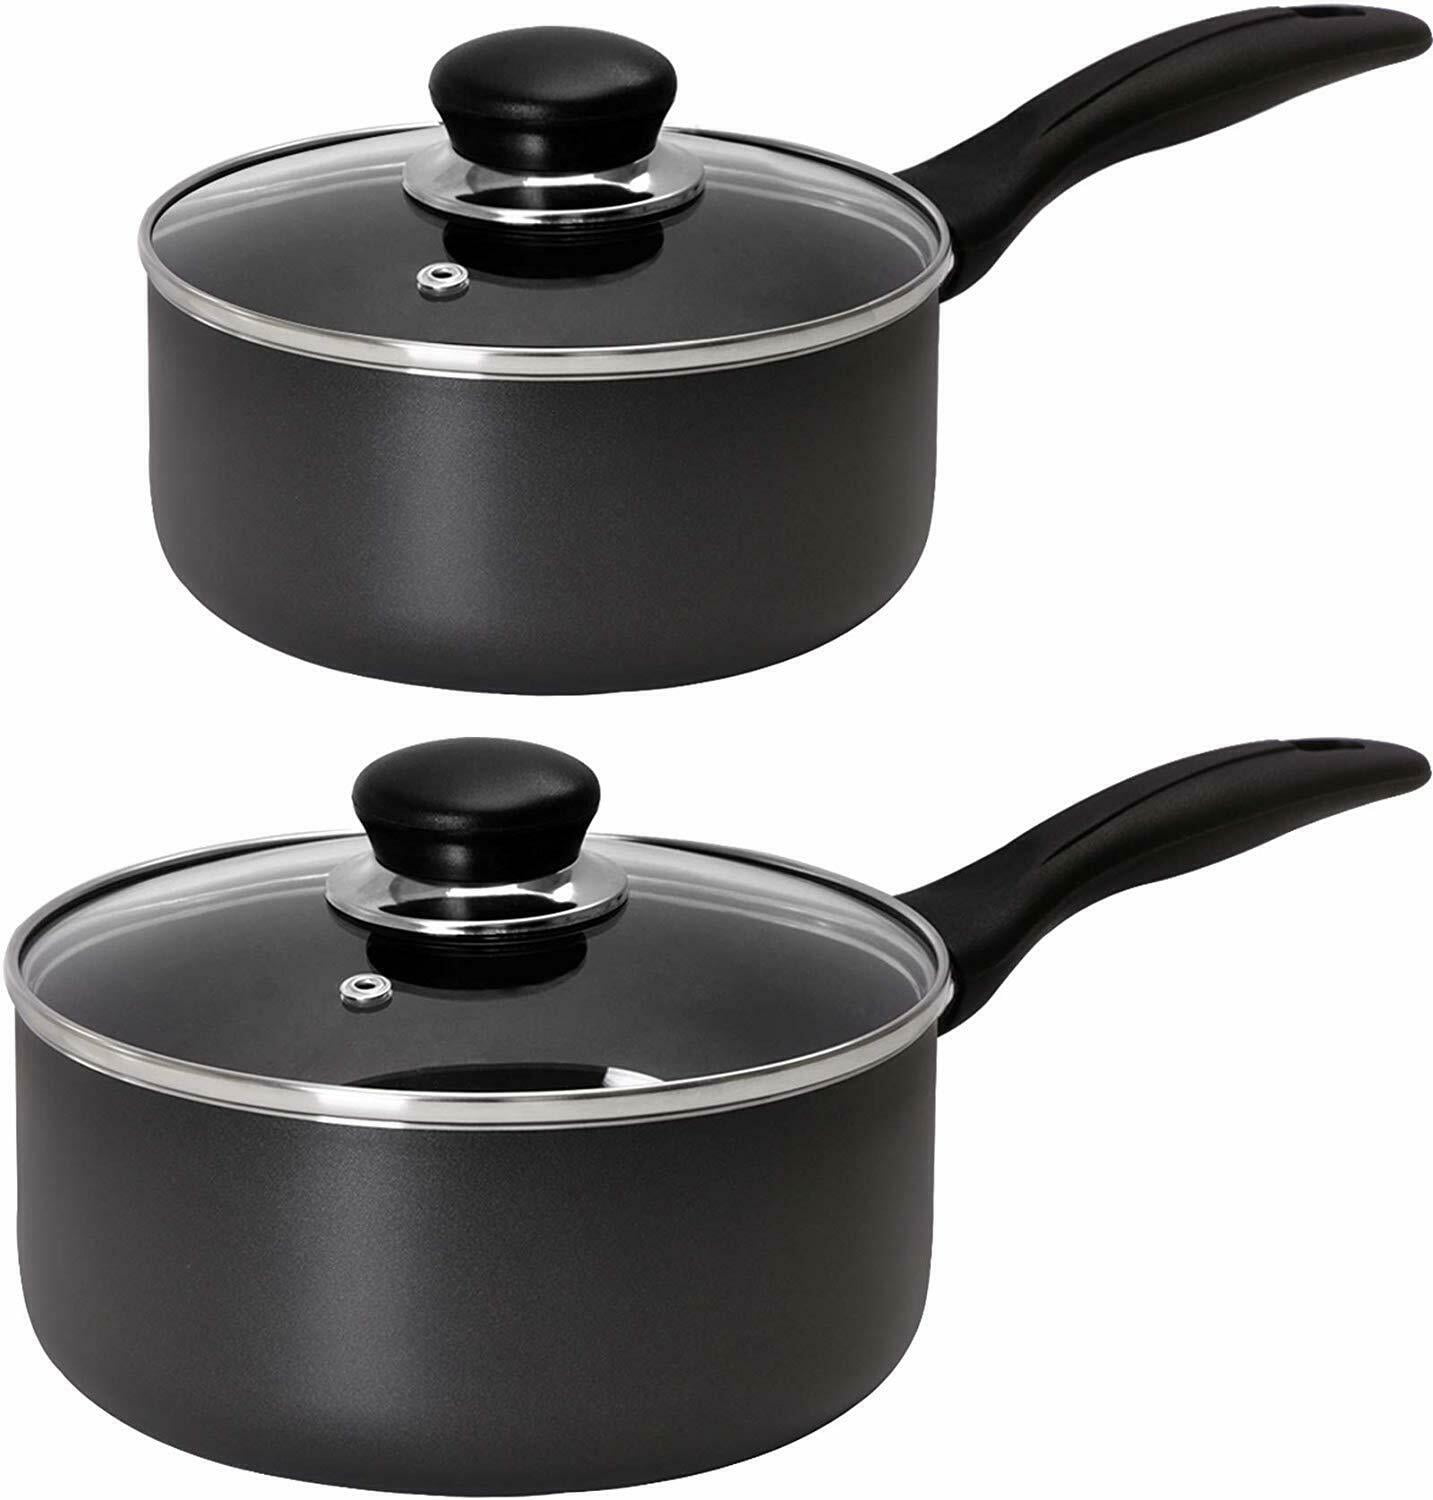 Quality Glass Saucepan Lid Perfect for Saucepan and Frying Pans 6 Inch 16cm to Fit All 16cm Saucepans 